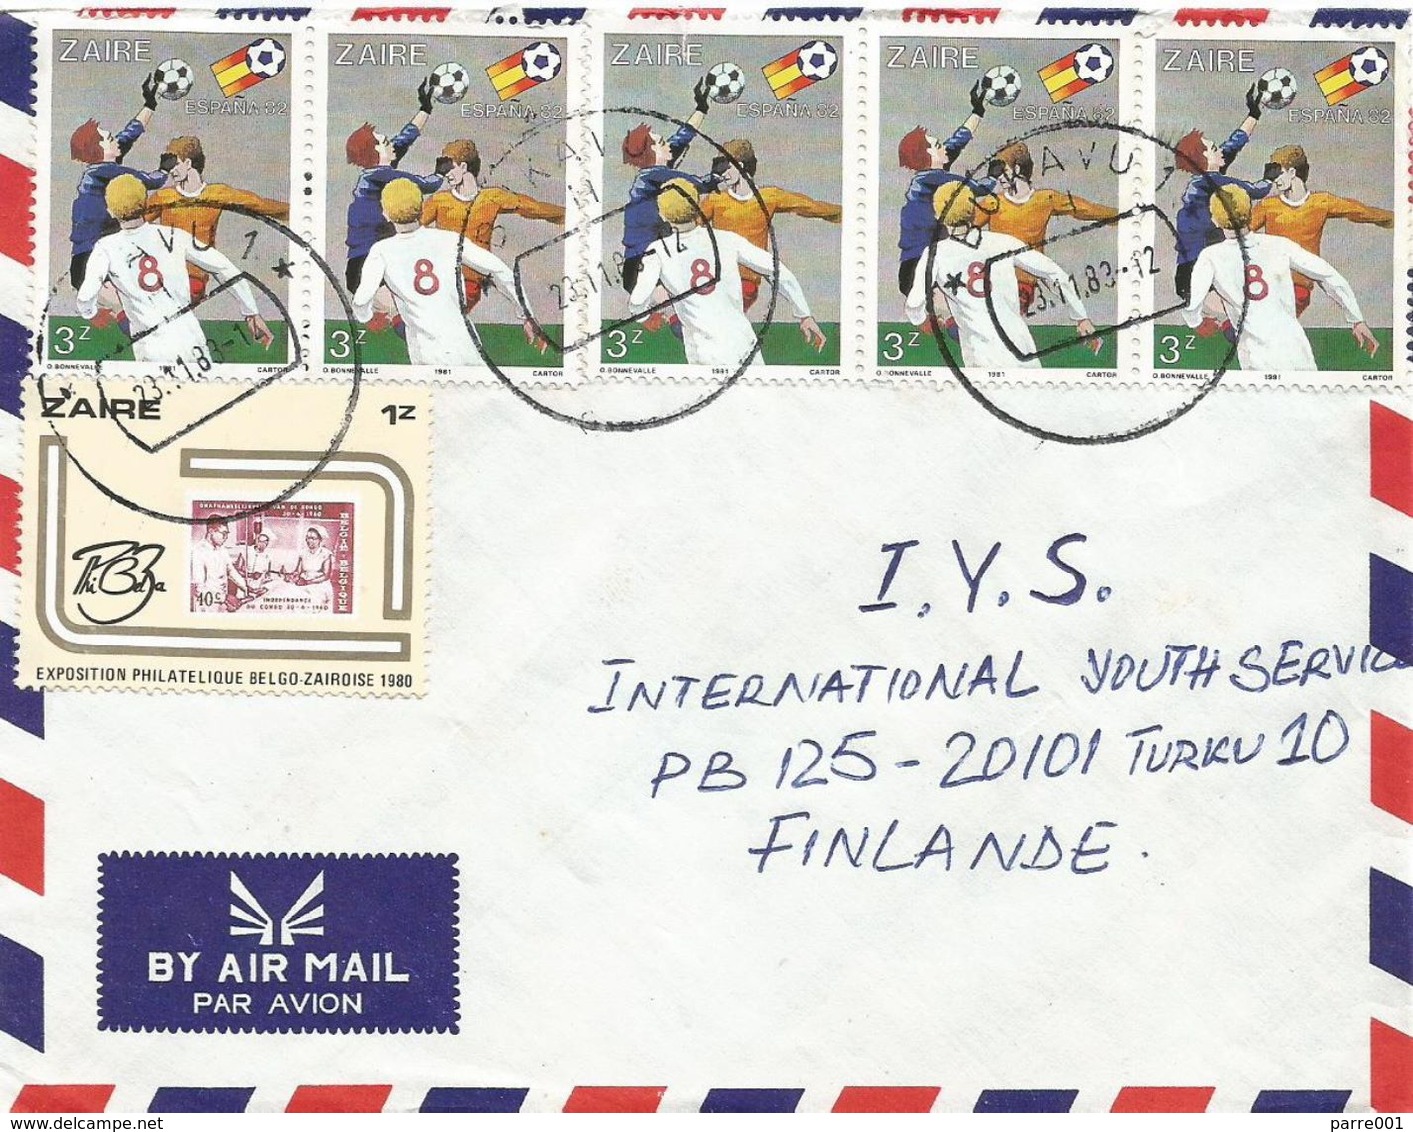 Zaire DRC Congo 1983 Bukavu World Cup Football Spain 3Z Stamp Exhibition Stamps On Stamps 1Z Cover - Used Stamps